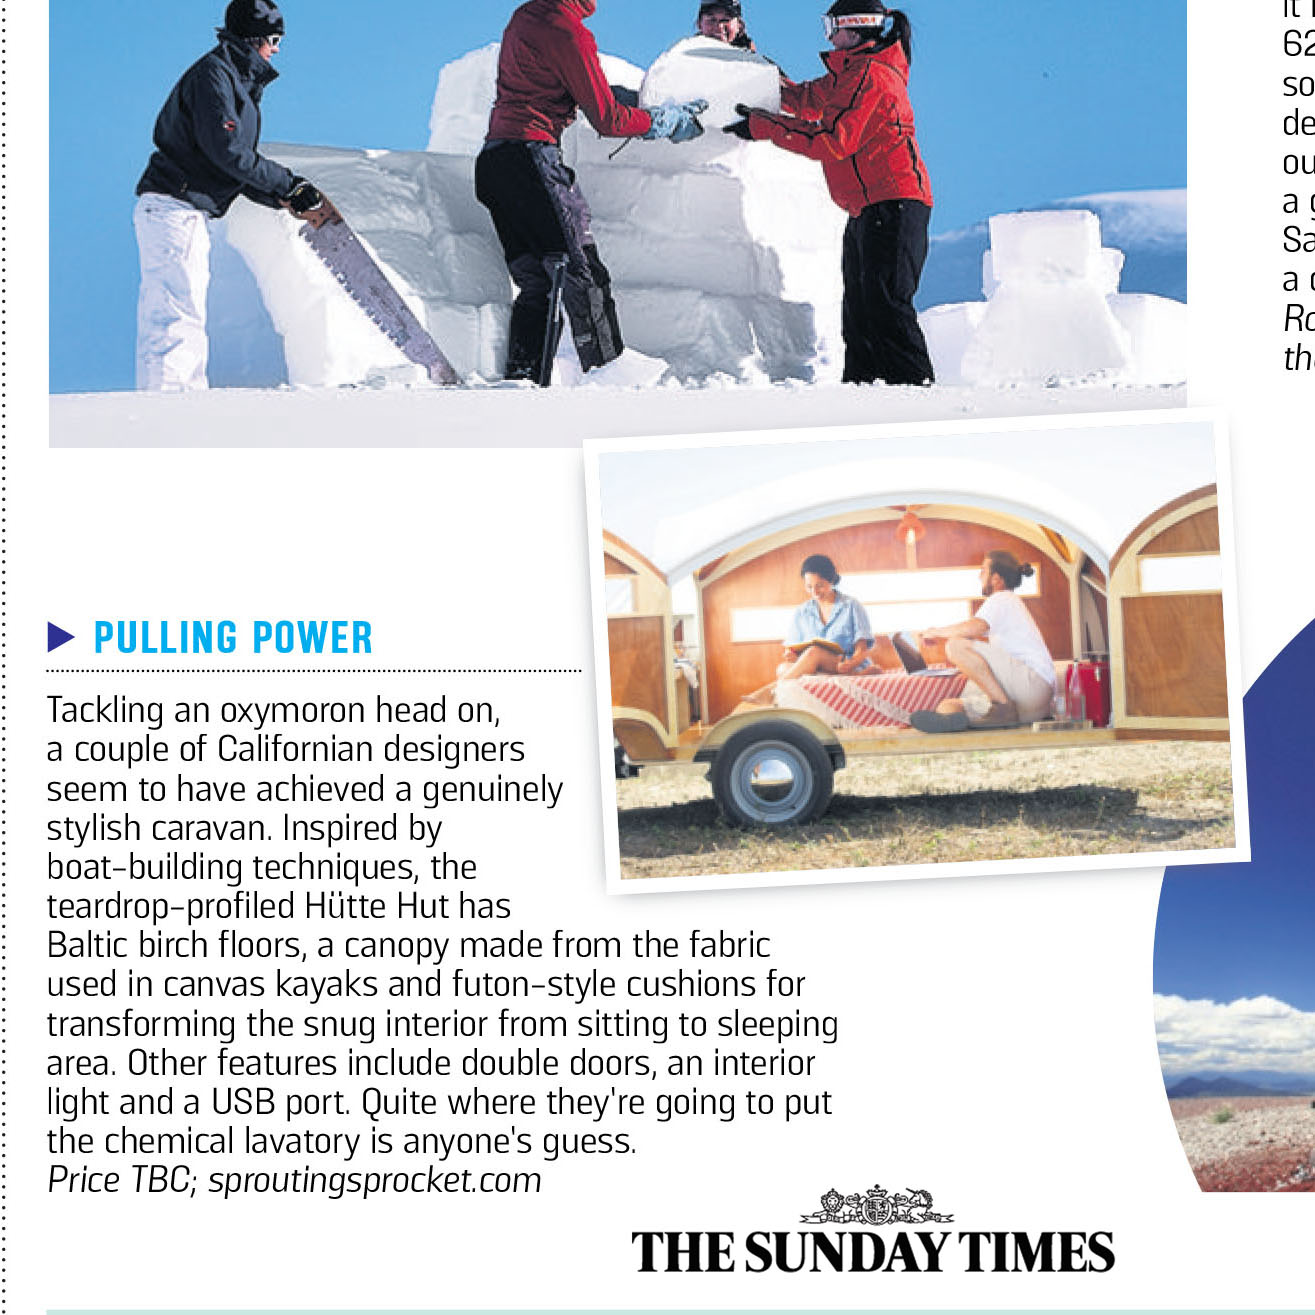 The Sunday Times, Feb. 15, 2015